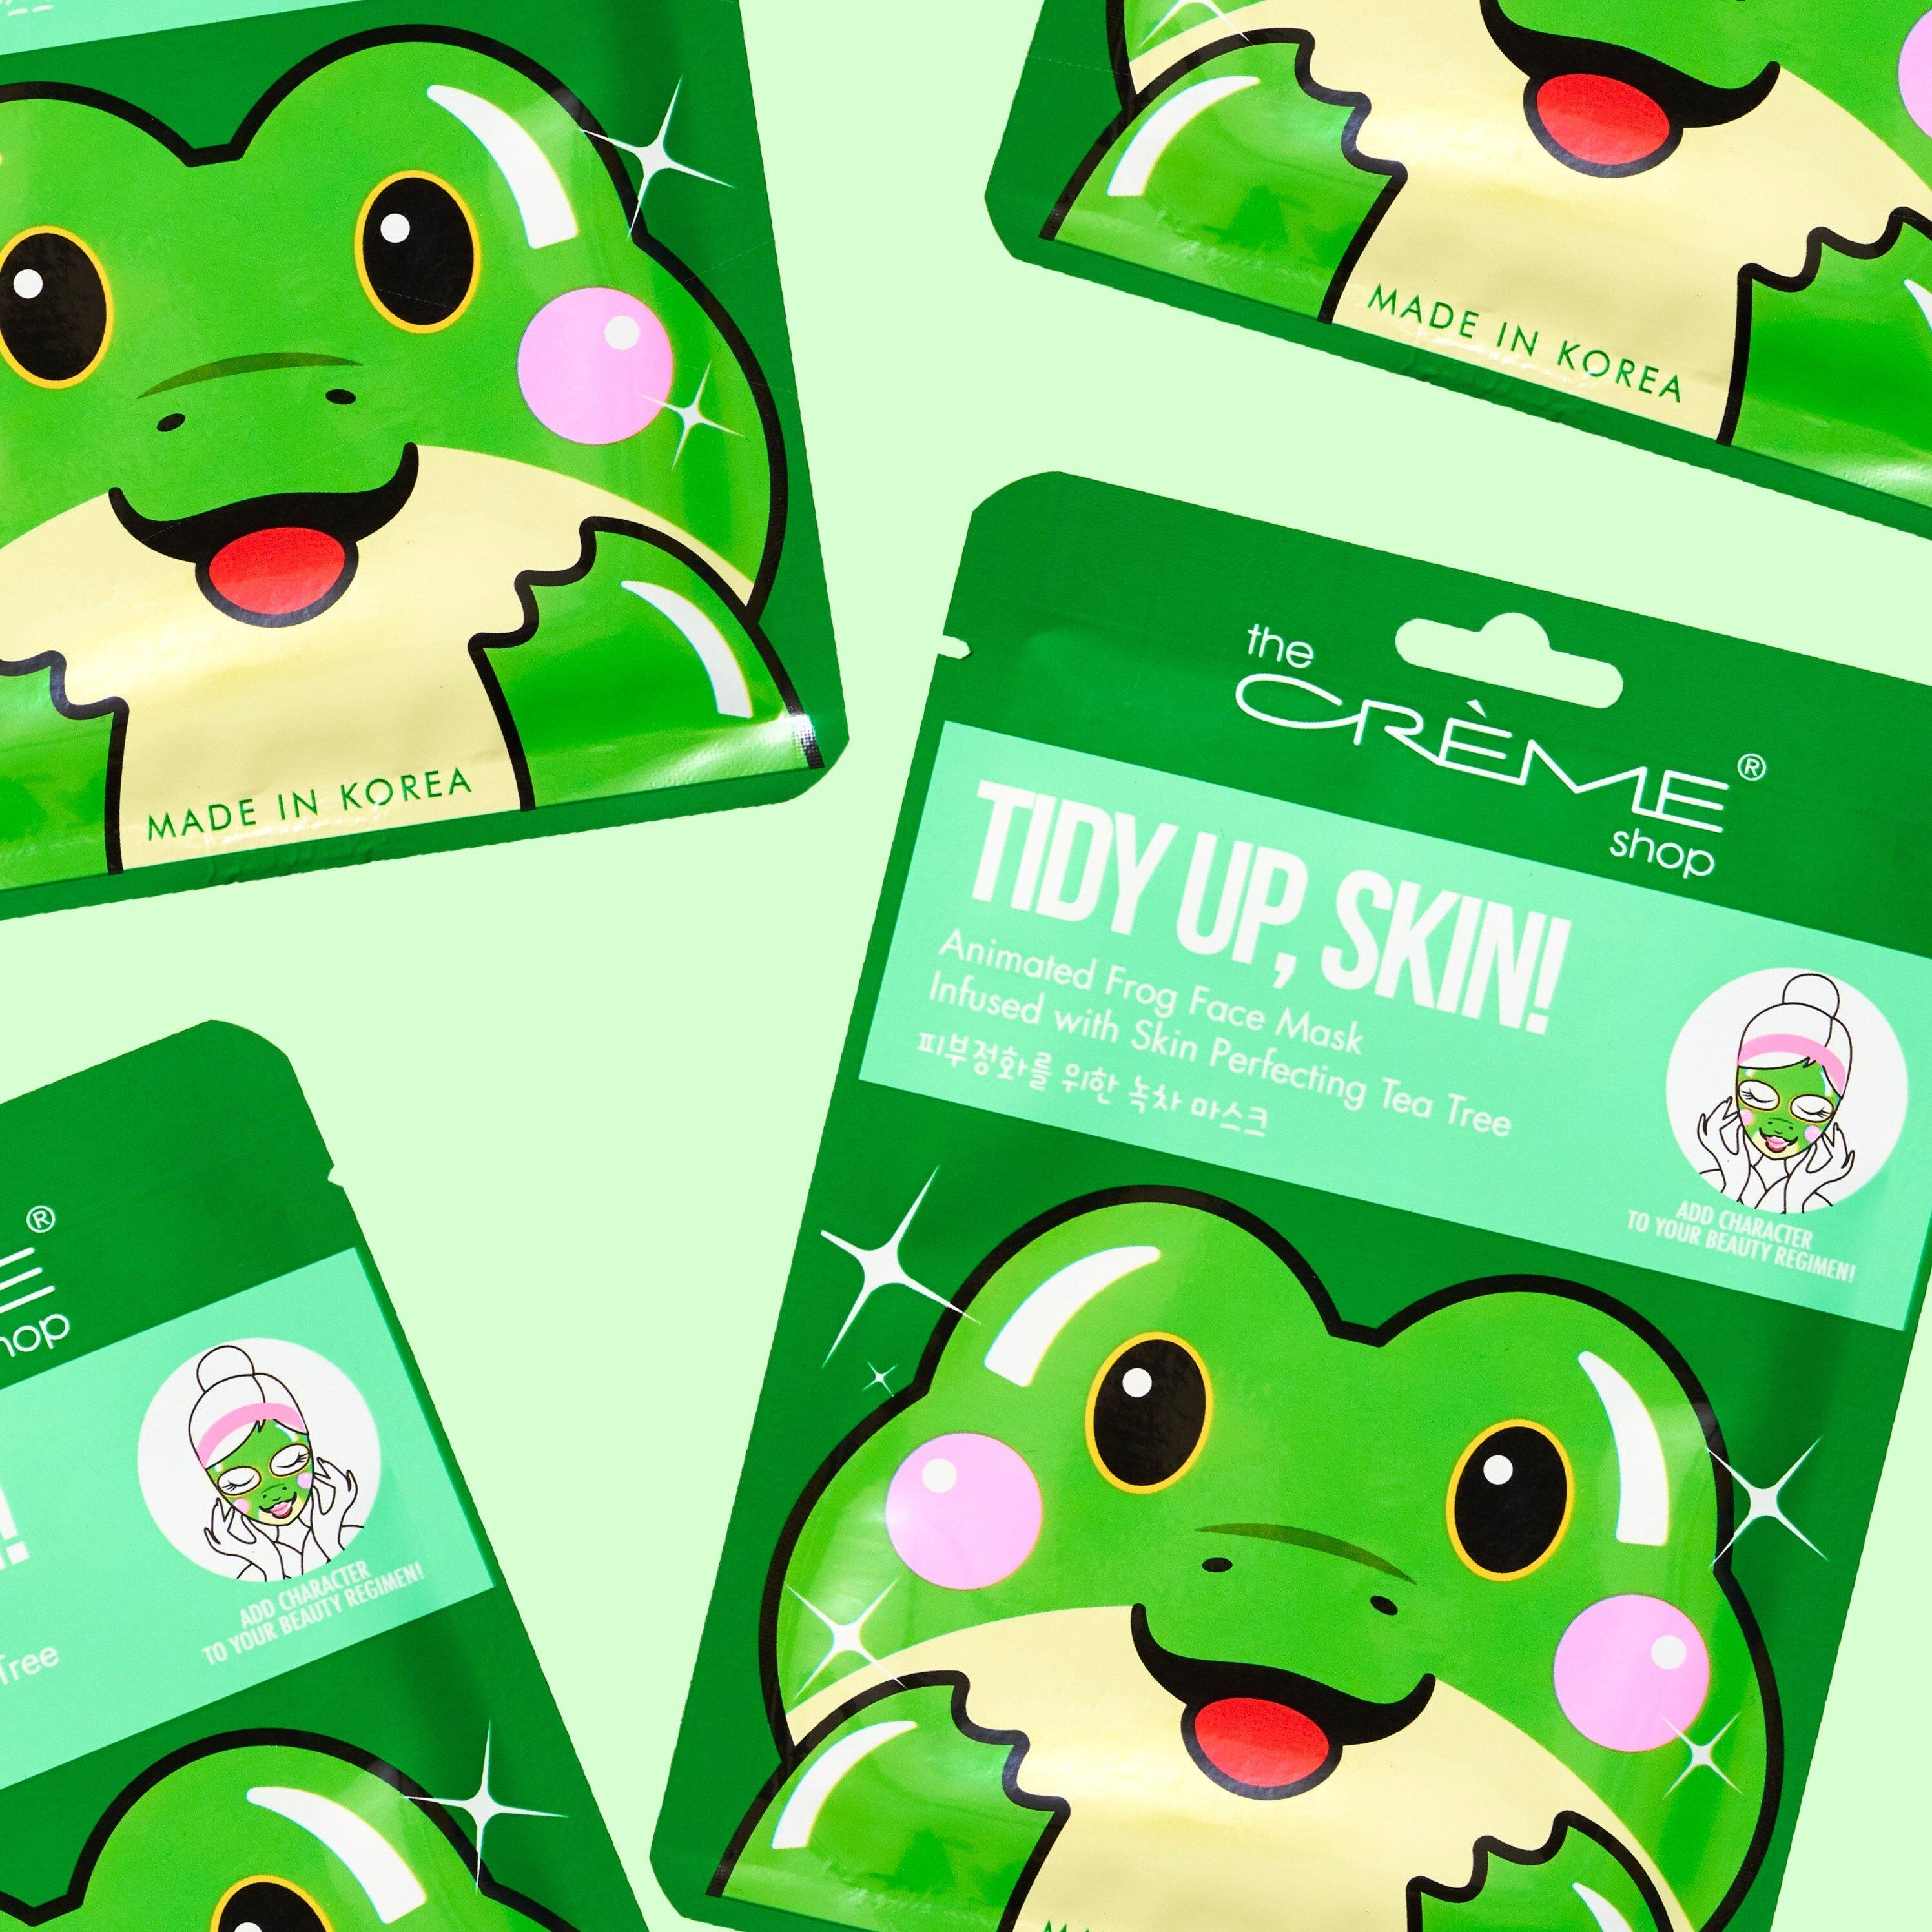 The Crème Shop - Tidy Up, Skin! Animated Frog Face Mask - Skin Perfecting Tea Tree